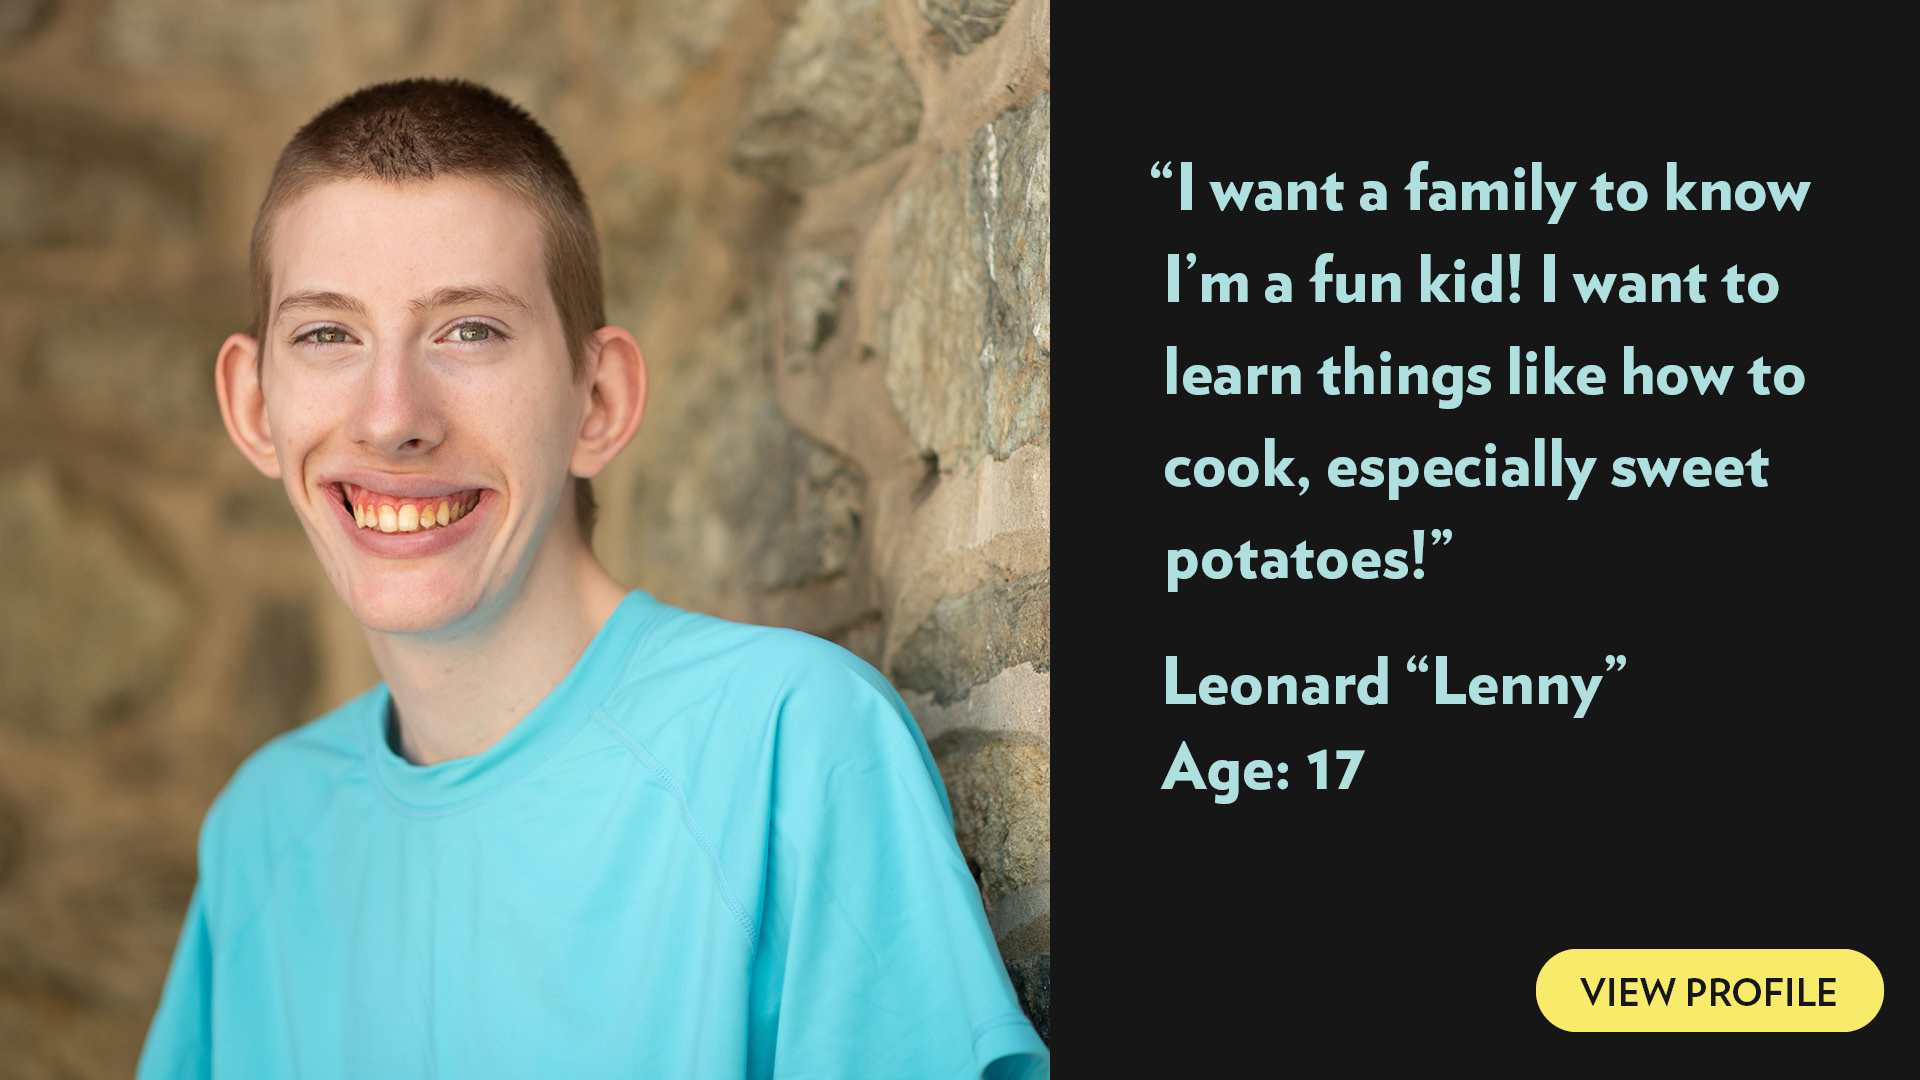 I want a family to know I’m a fun kid! I want to learn things like how to cook, especially sweet potatoes! Leonard(Lennie), age 17. View profile